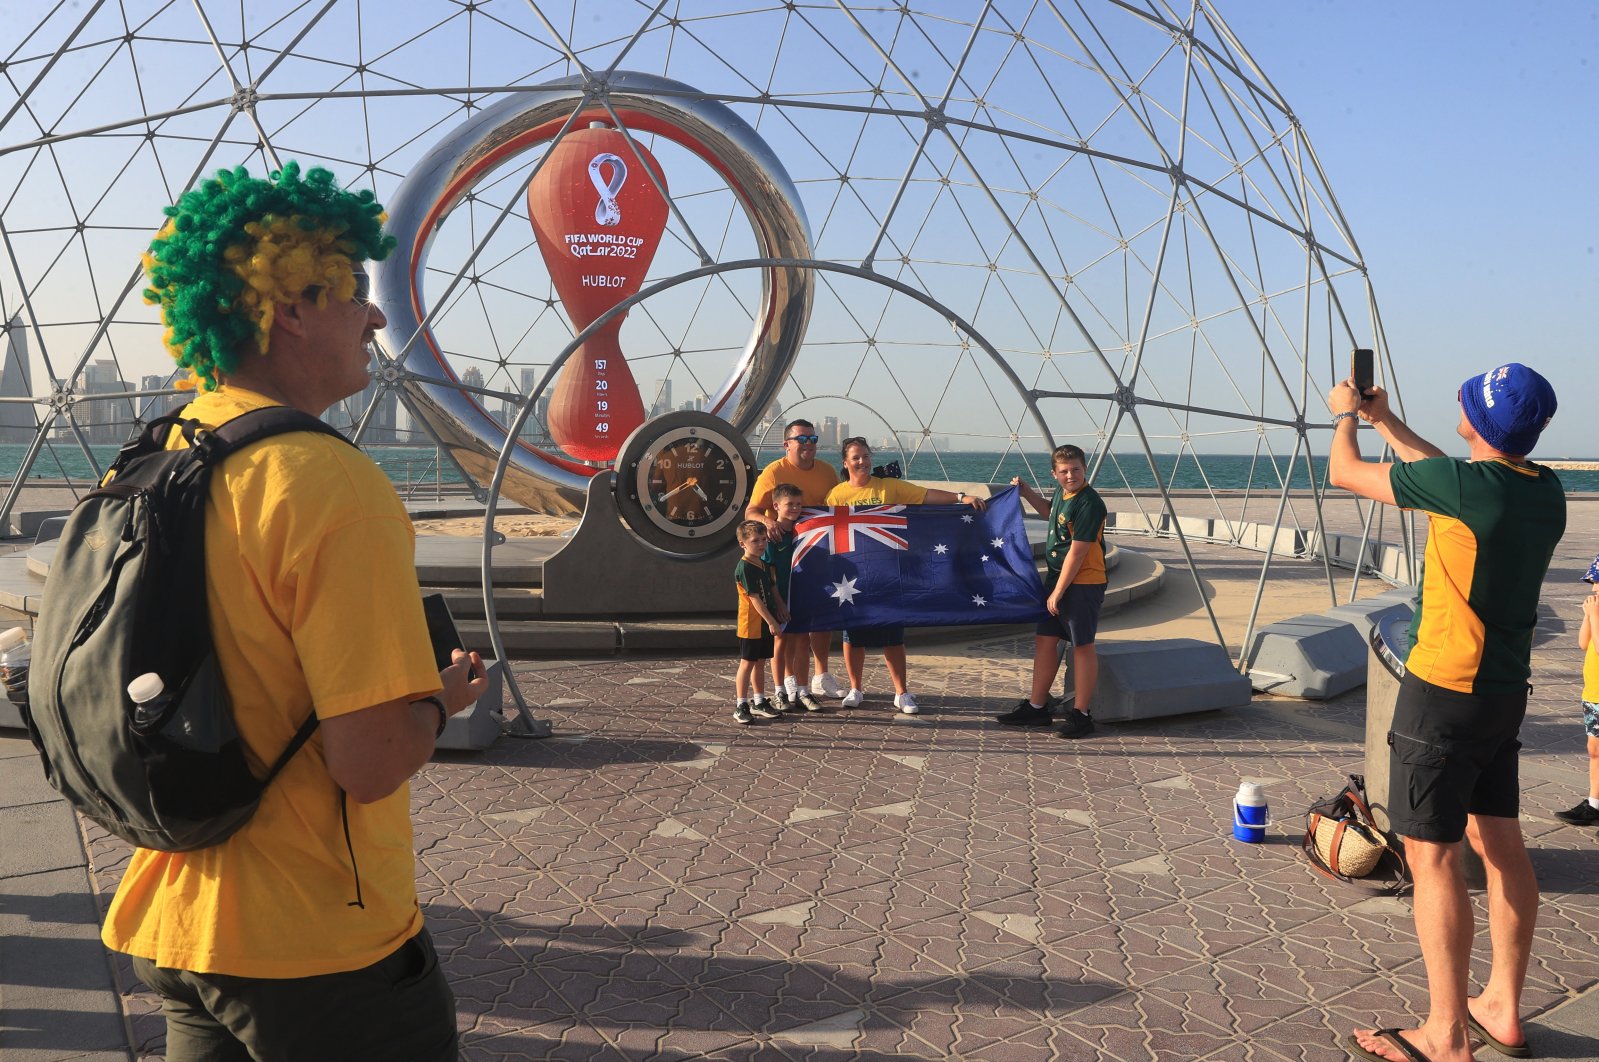 Australia fans are seen in front of the 2022 World Cup countdown clock, Doha, Qatar, June 16, 2022.